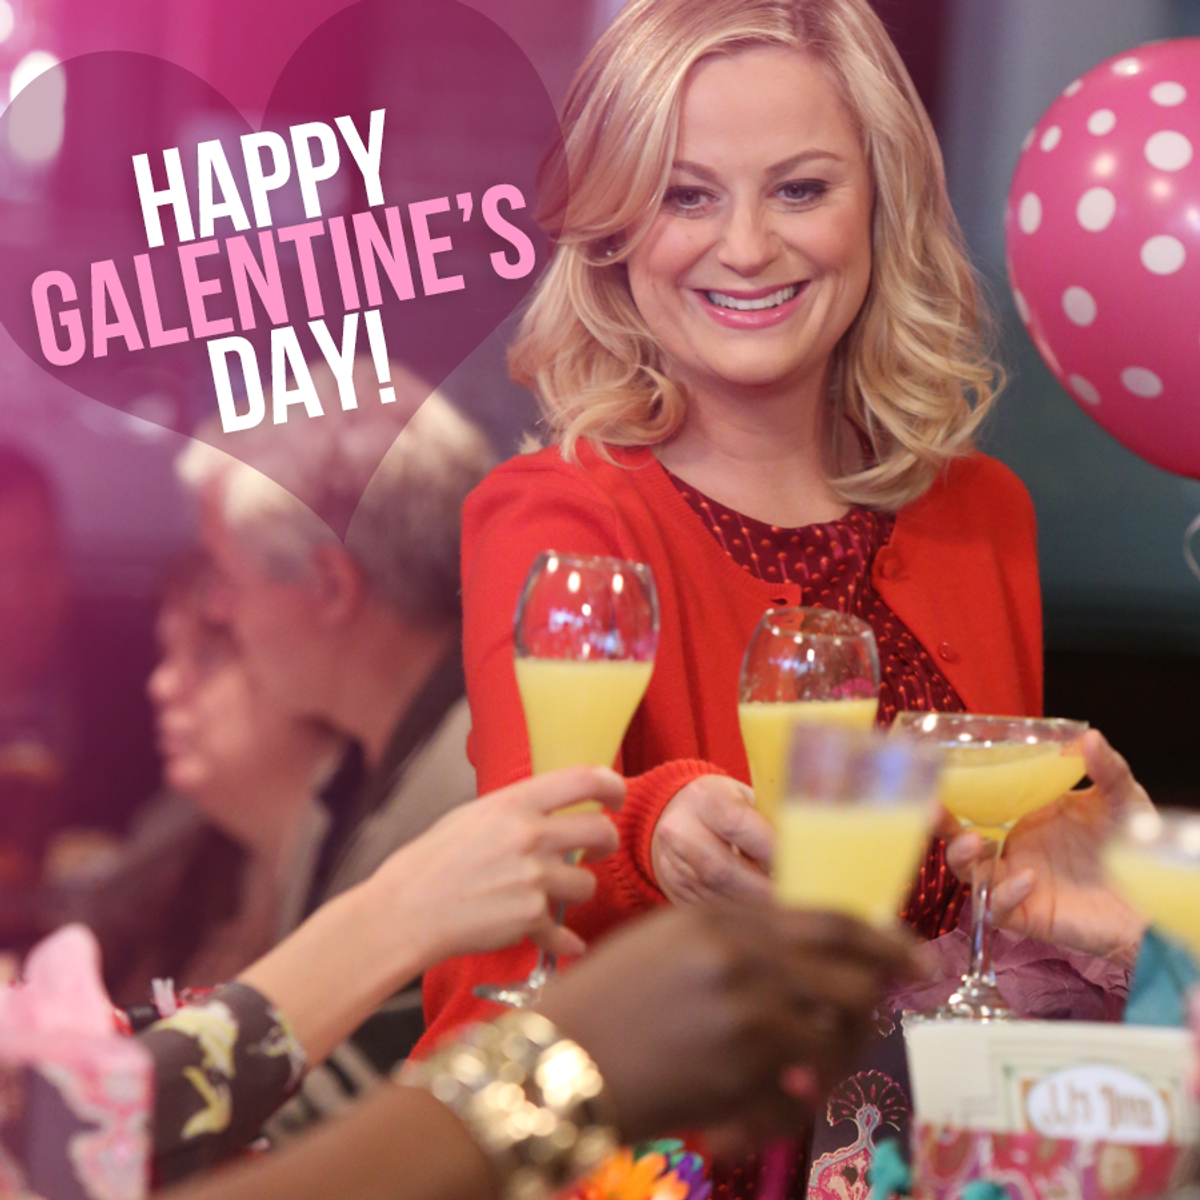 A "Galentine's" Love Letter